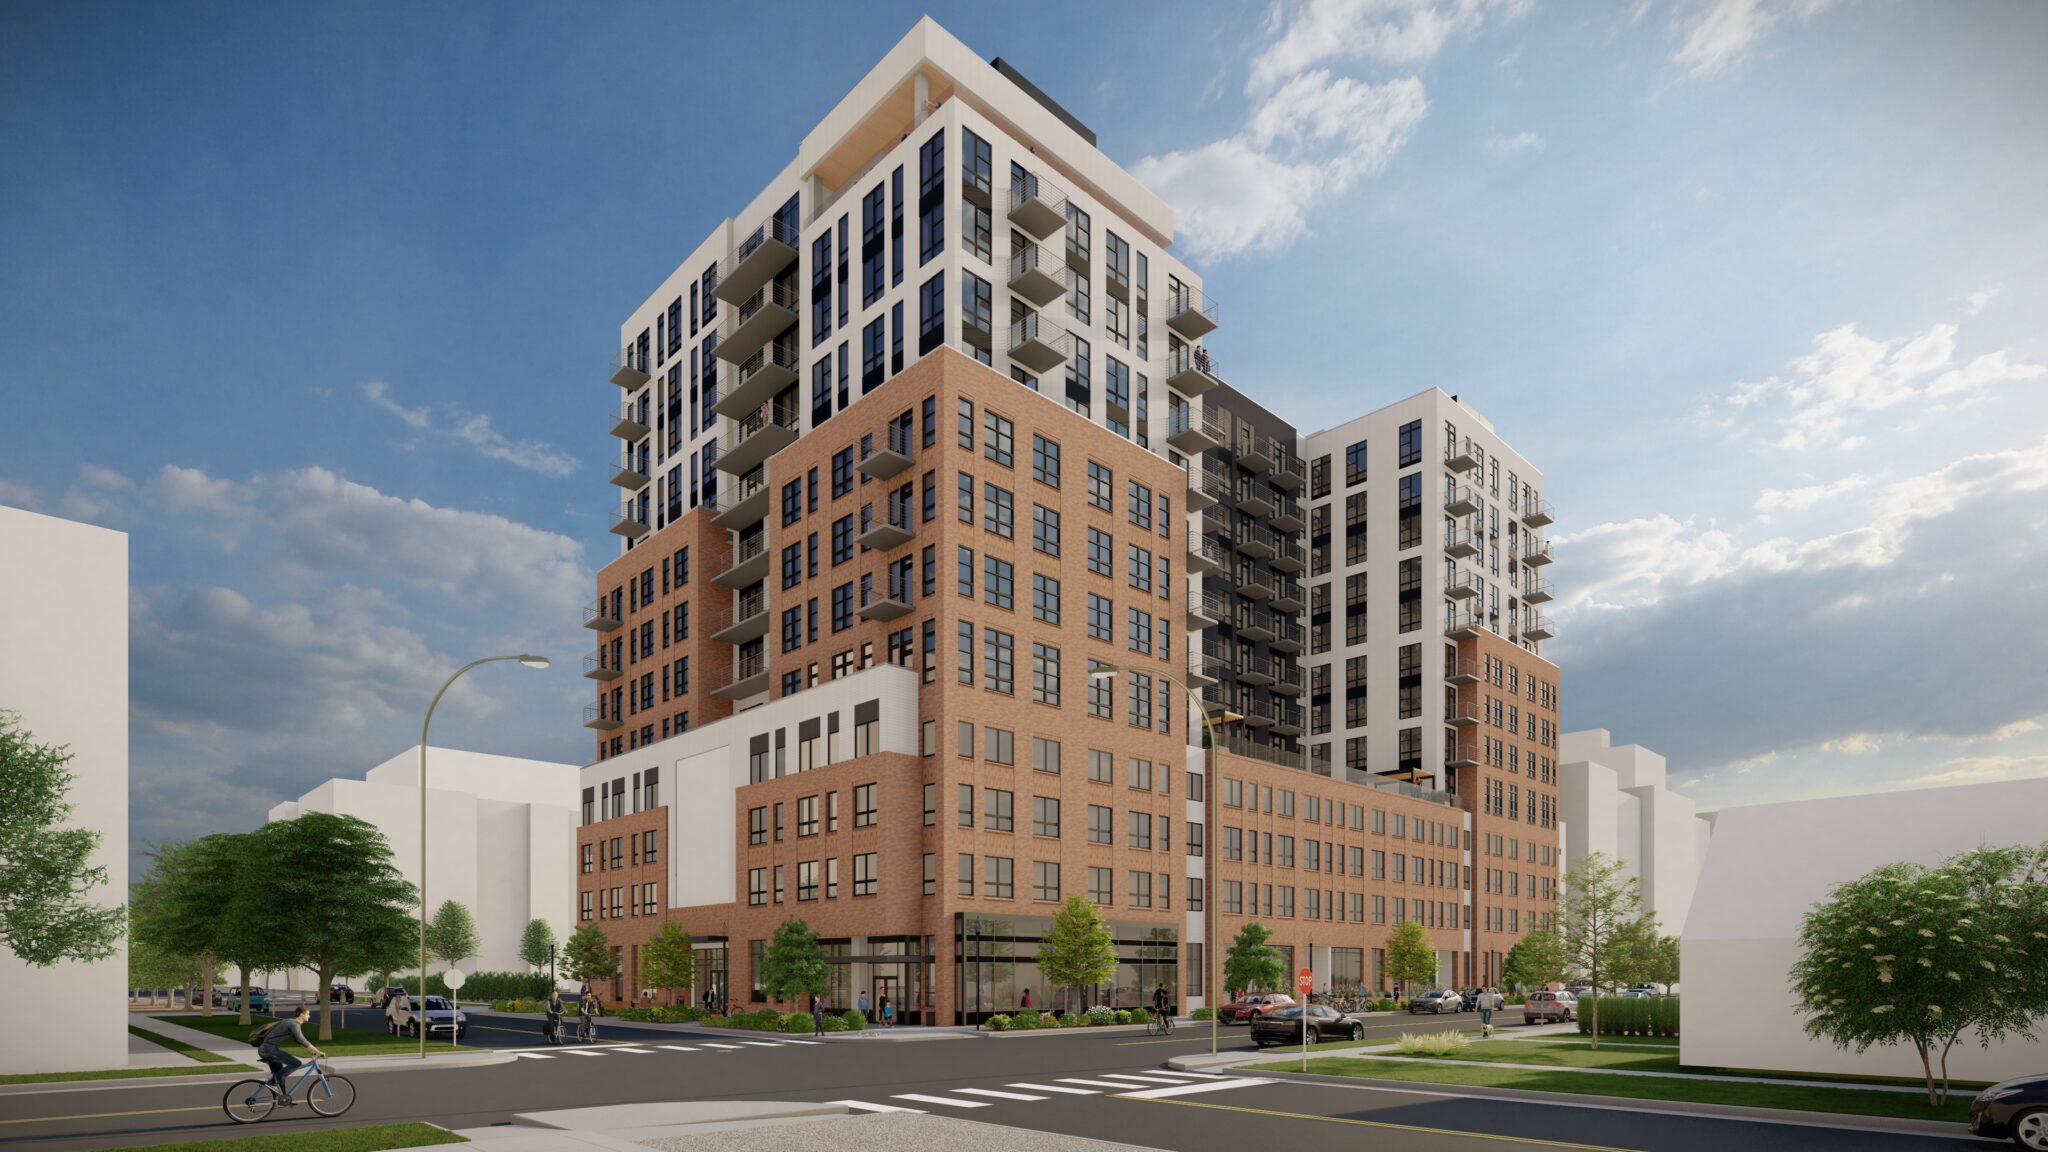 Golden Triangle site of apartment project purchased